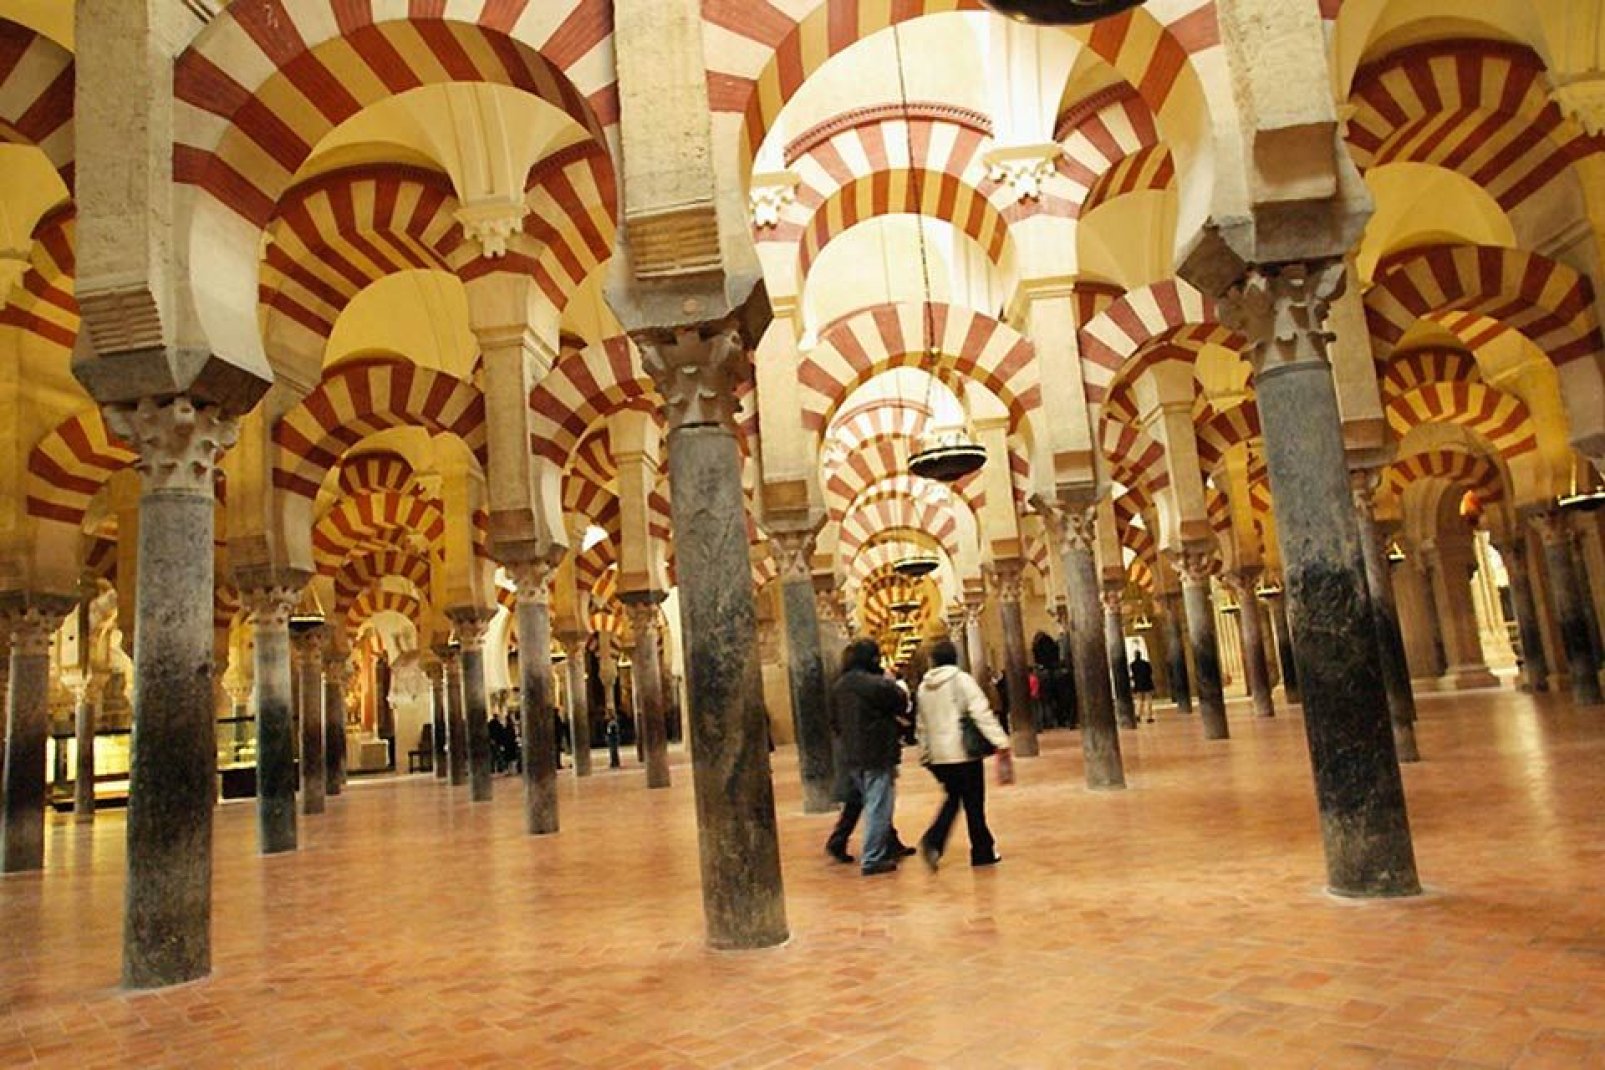 The Mosque-Cathedral of Cordoba is the most important monument in the Islamic Western World.